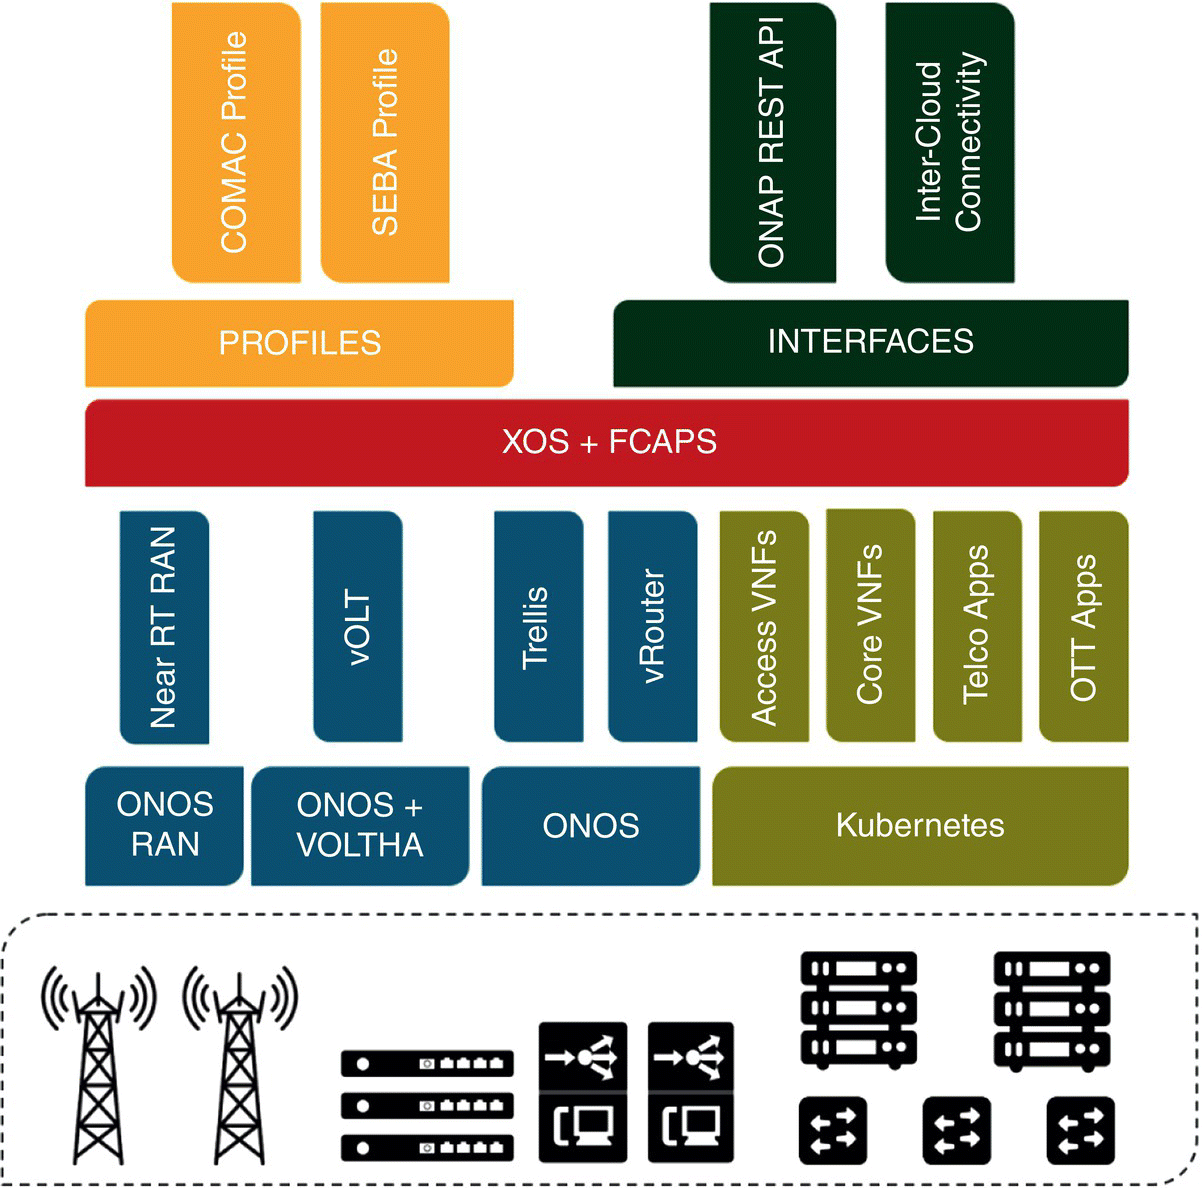 CORD software reference model with stacked boxes labeled ONOS RAN, ONOS + VOLTHA, ONOS, Kubernetes, Near RT RAN, vOLT, Trellis, vRouter, Access VNFs, Core VNFs, Telco Apps, OTT Apps, XOS + FCAPS, PROFILES, INTERFACES, etc.